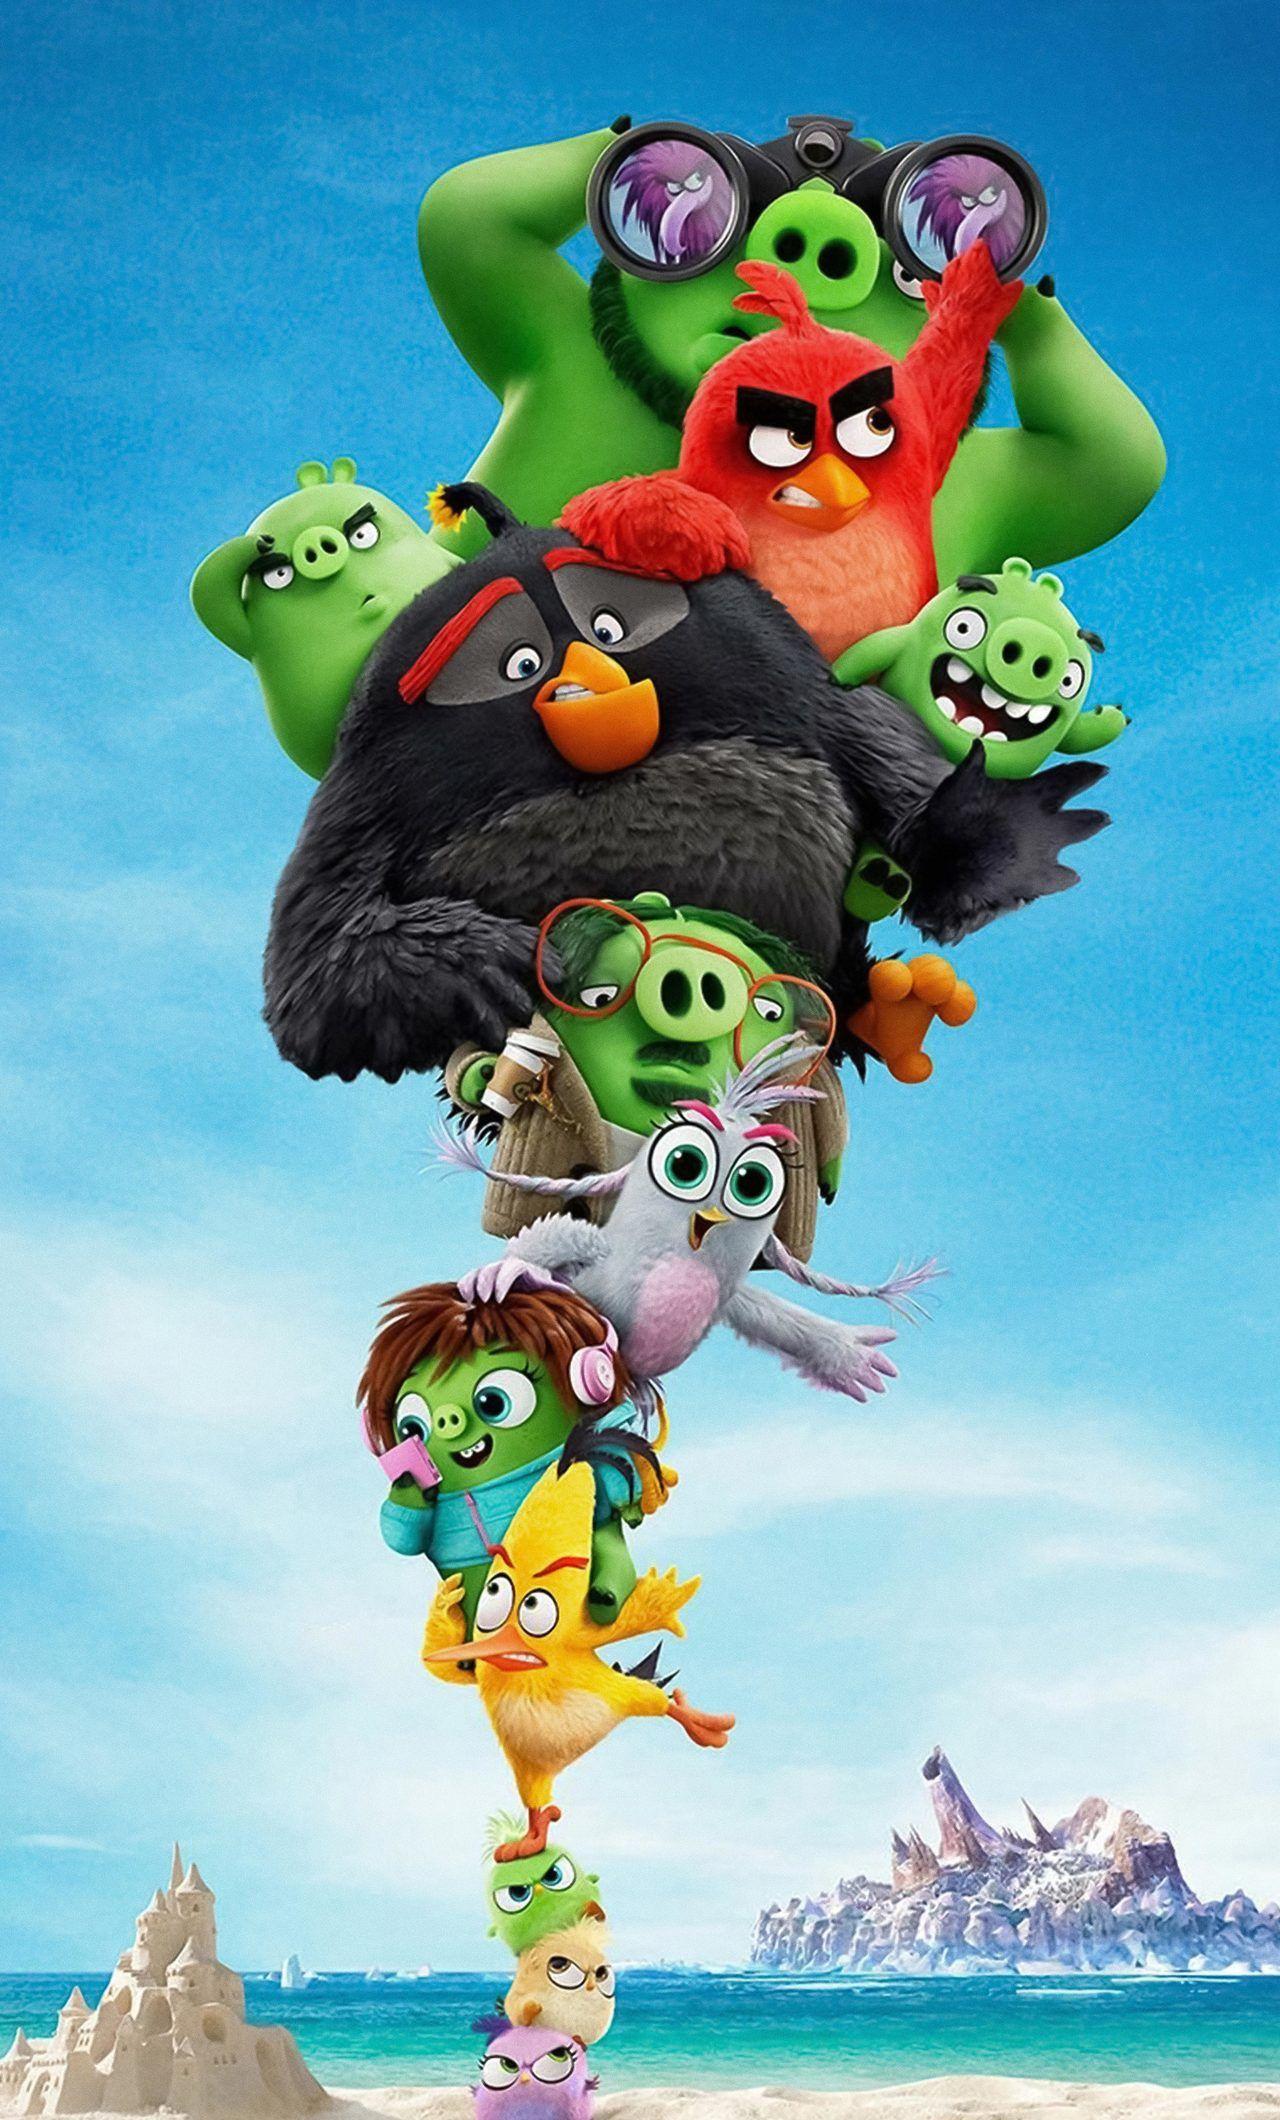 The Angry Birds Movie 2 Wallpaper Free The Angry Birds Movie 2 Background